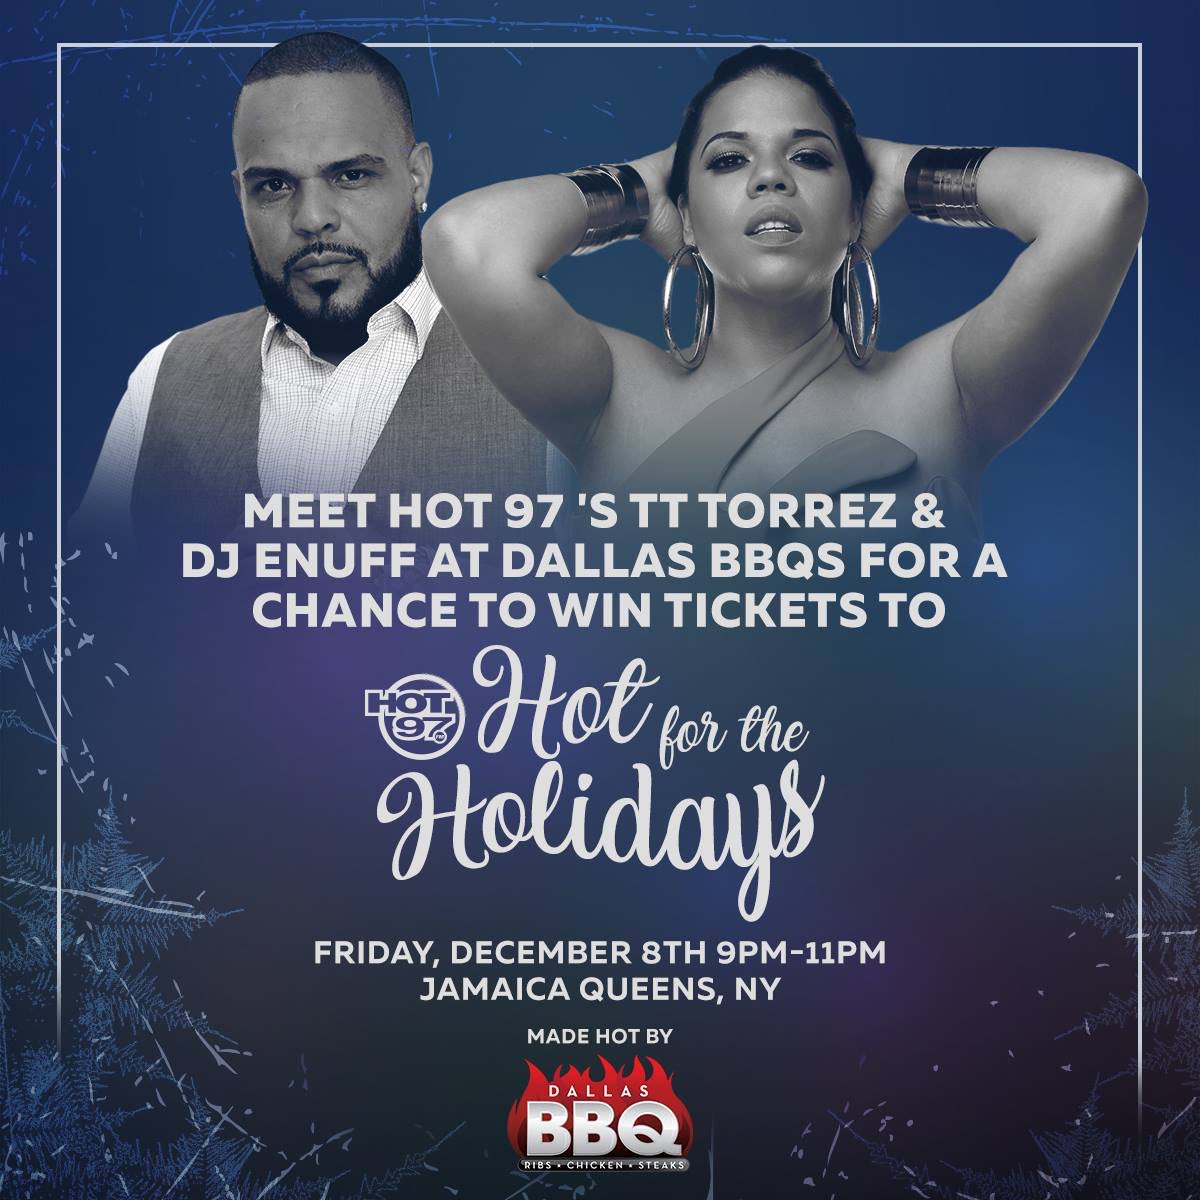 QUEENS, NY!! We’re giving away tickets to HOT FOR THE HOLIDAYS!!! Join TT Torrez and DJ Bobby Trends mixing live at Dallas BBQ’s located at 89-14 Parsons Blvd in Jamaica, Queens on Friday December 8th from 9pm-11pm!! #DallasBBQ #Hot97